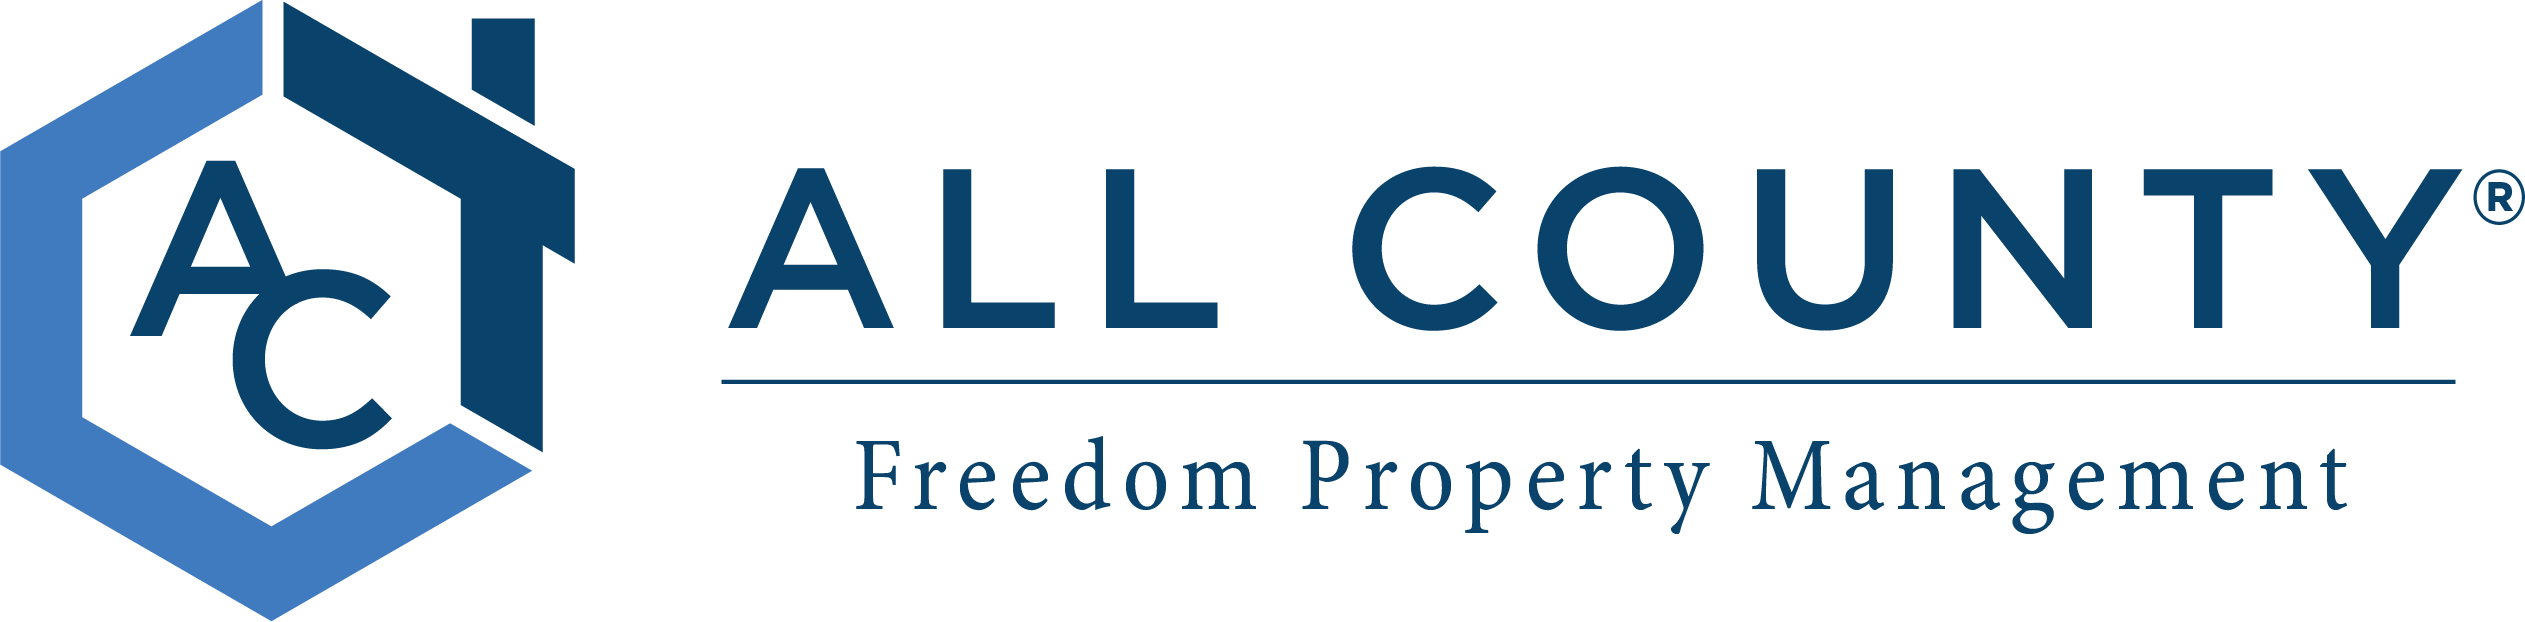 All County Freedom Property Management logo